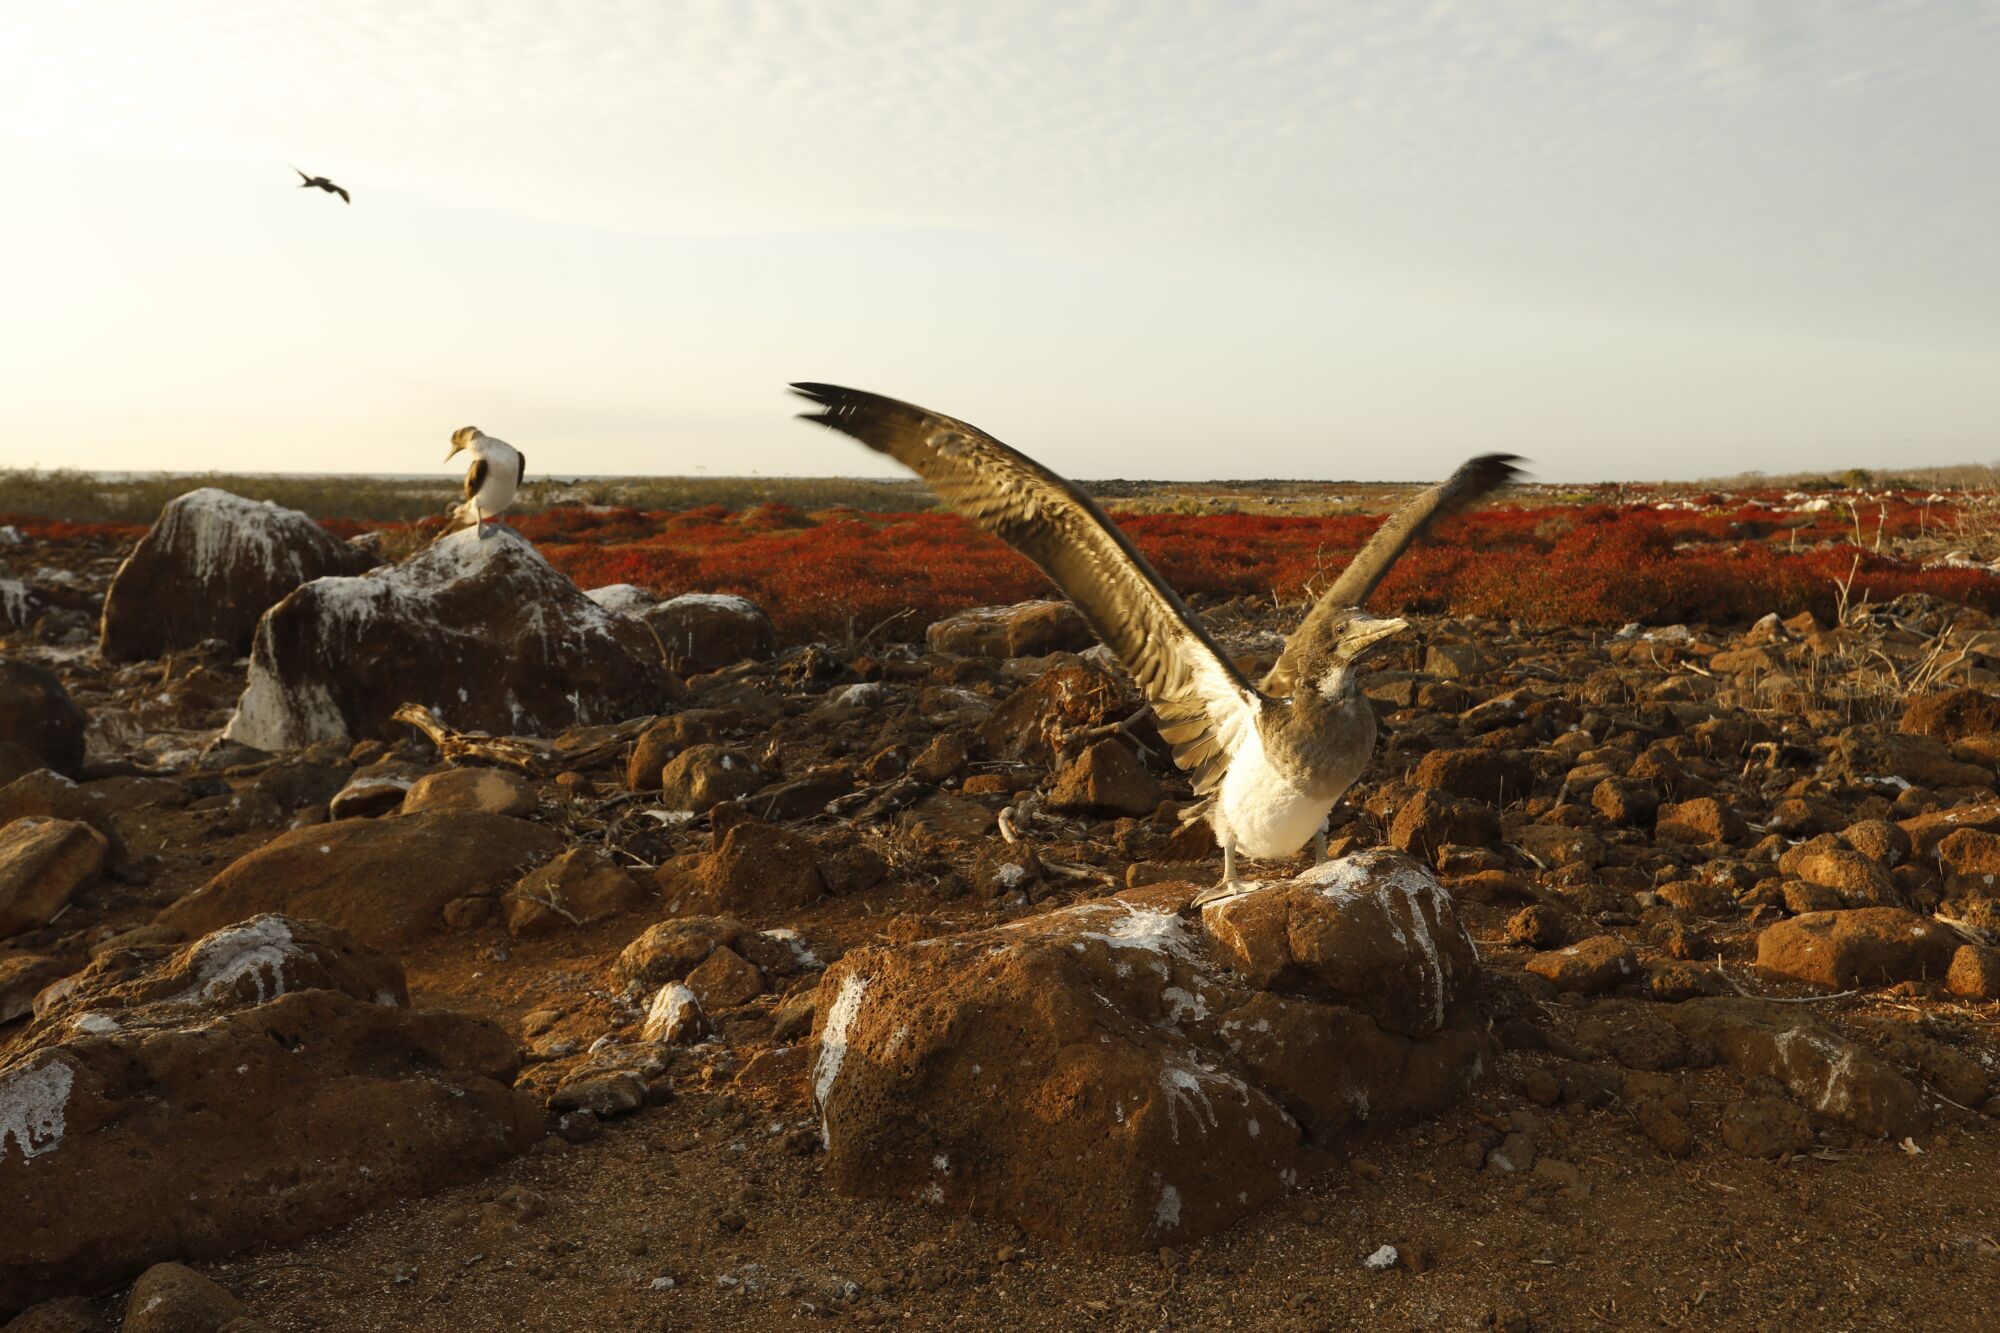 A juvenile blue-footed booby practices flapping his wings before beginning to fly on North Seymour Island in the Galapagos.